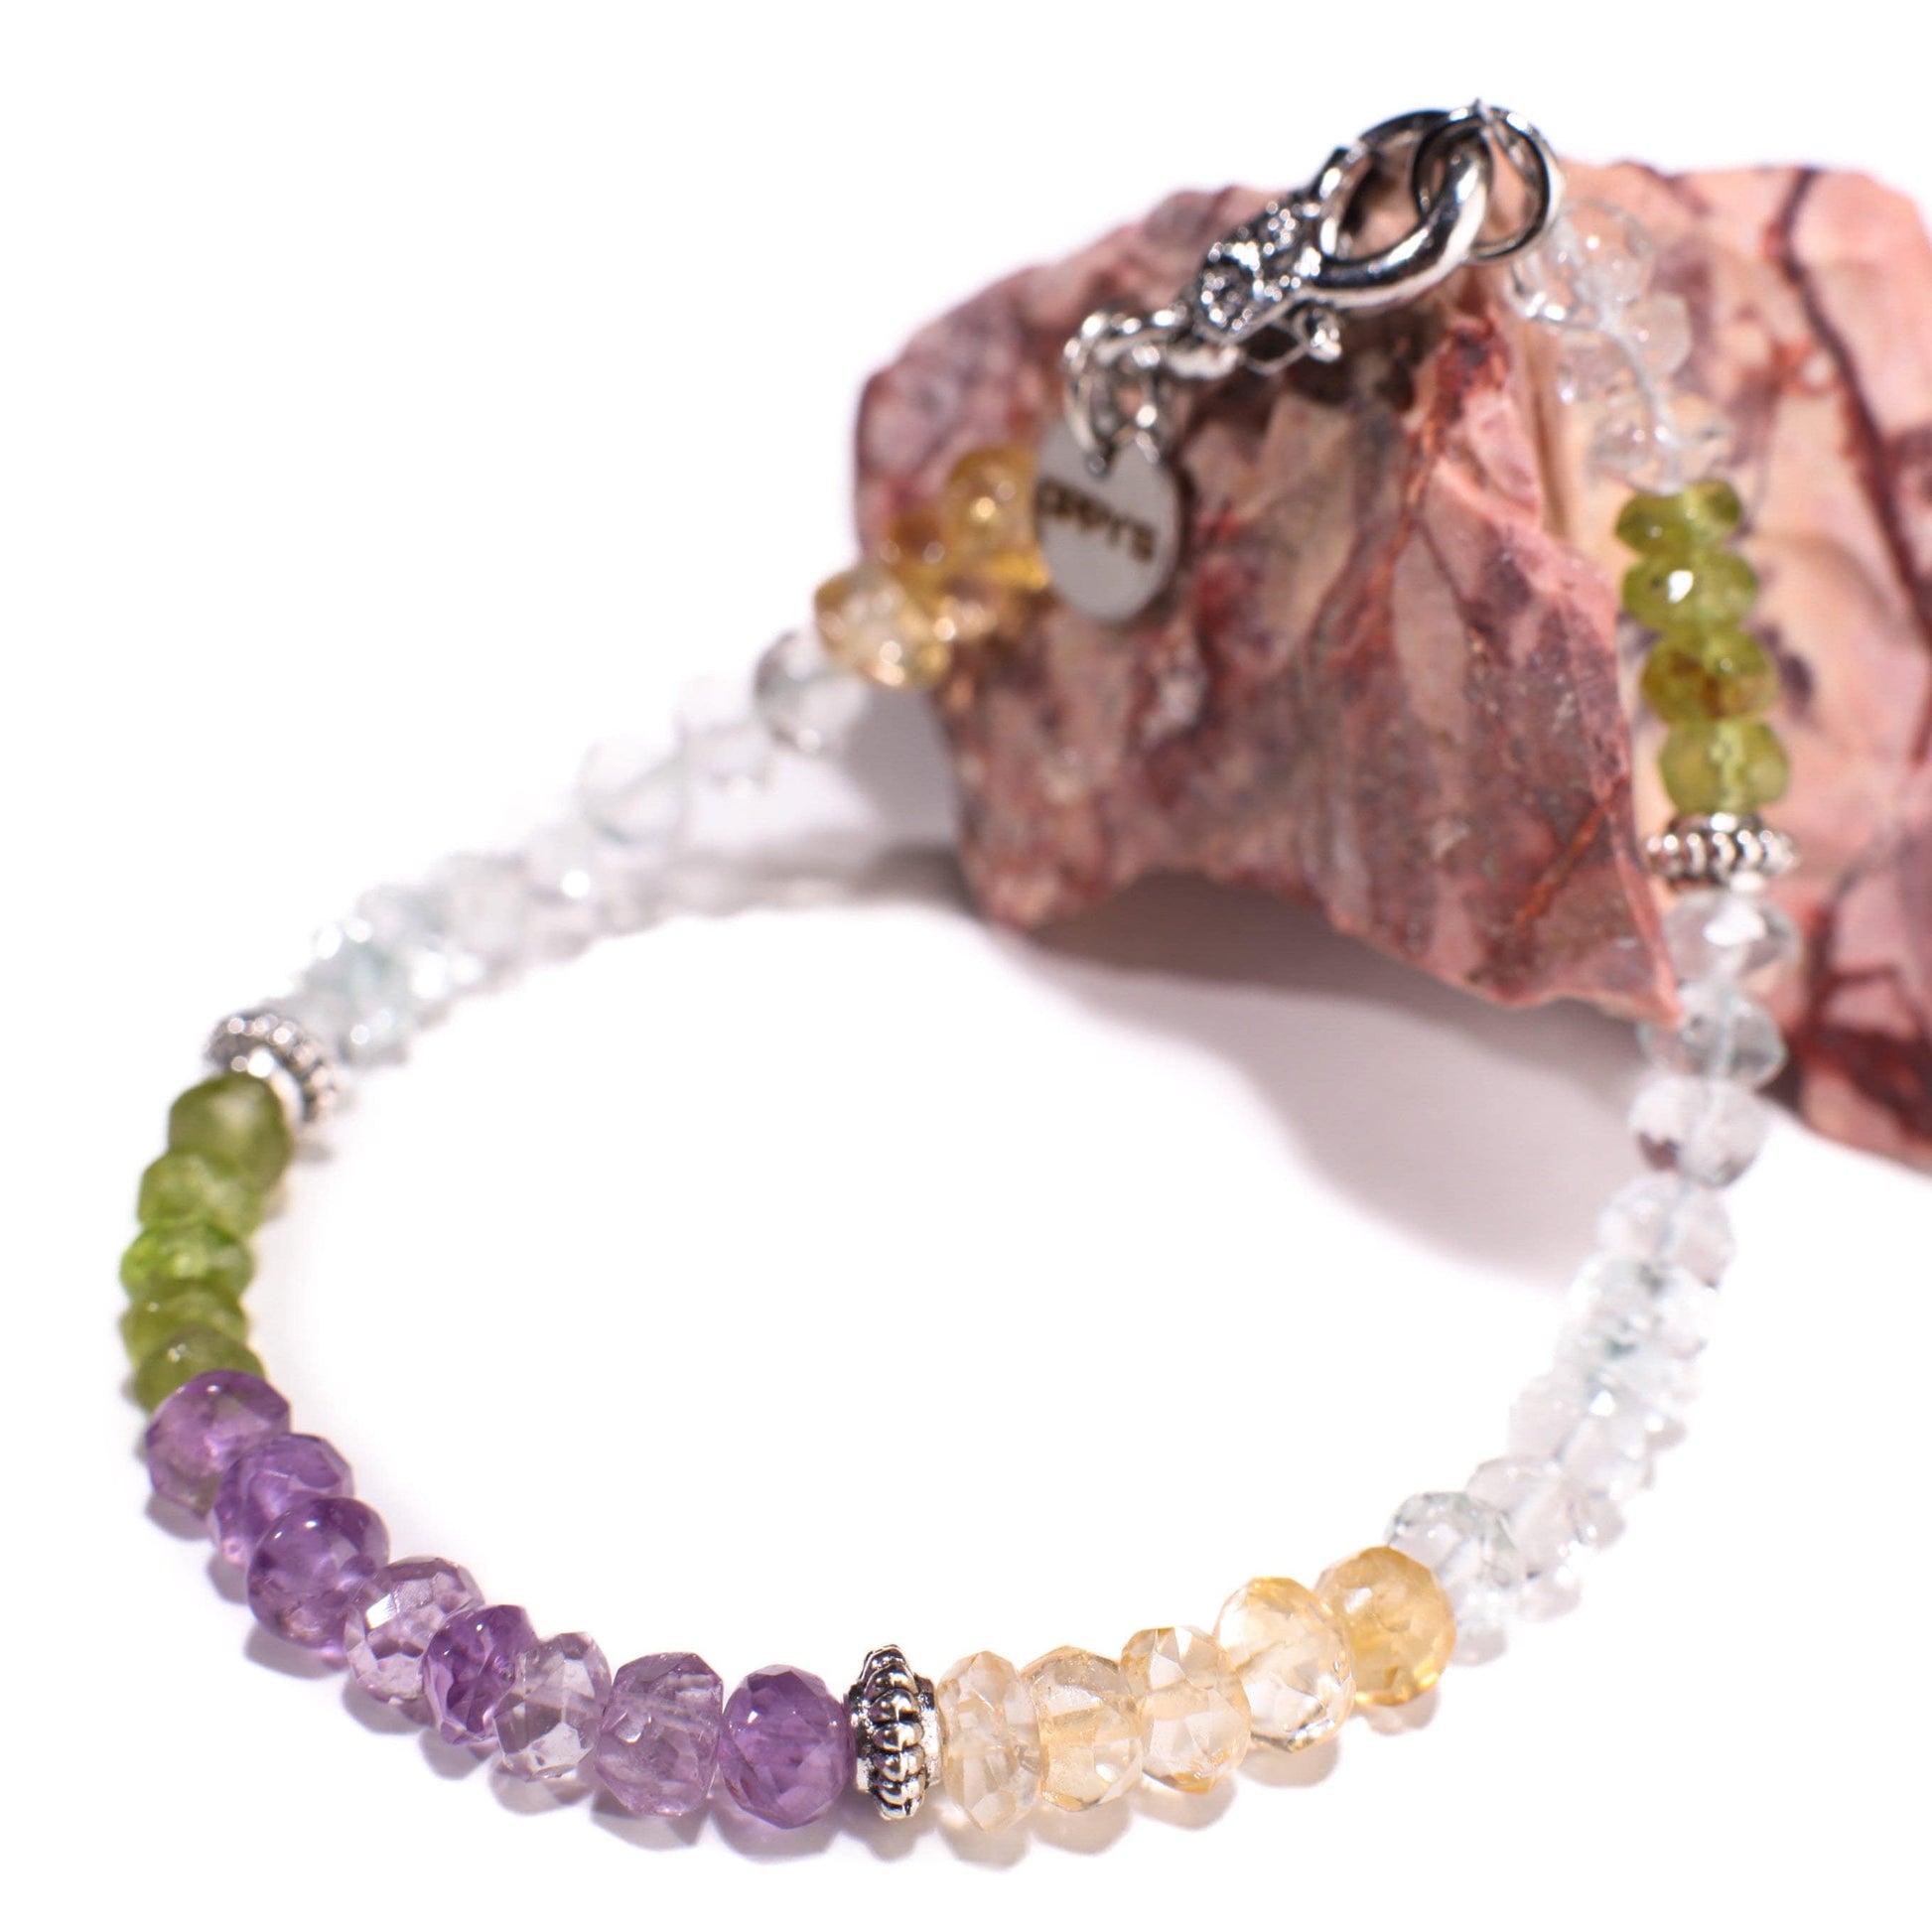 Multi Gemstones Peridot, Citrine, Amethyst, Aquamarine Faceted Rondelle 5.5-6mm Bracelet in Sterling Silver or Gold Filled Clasp